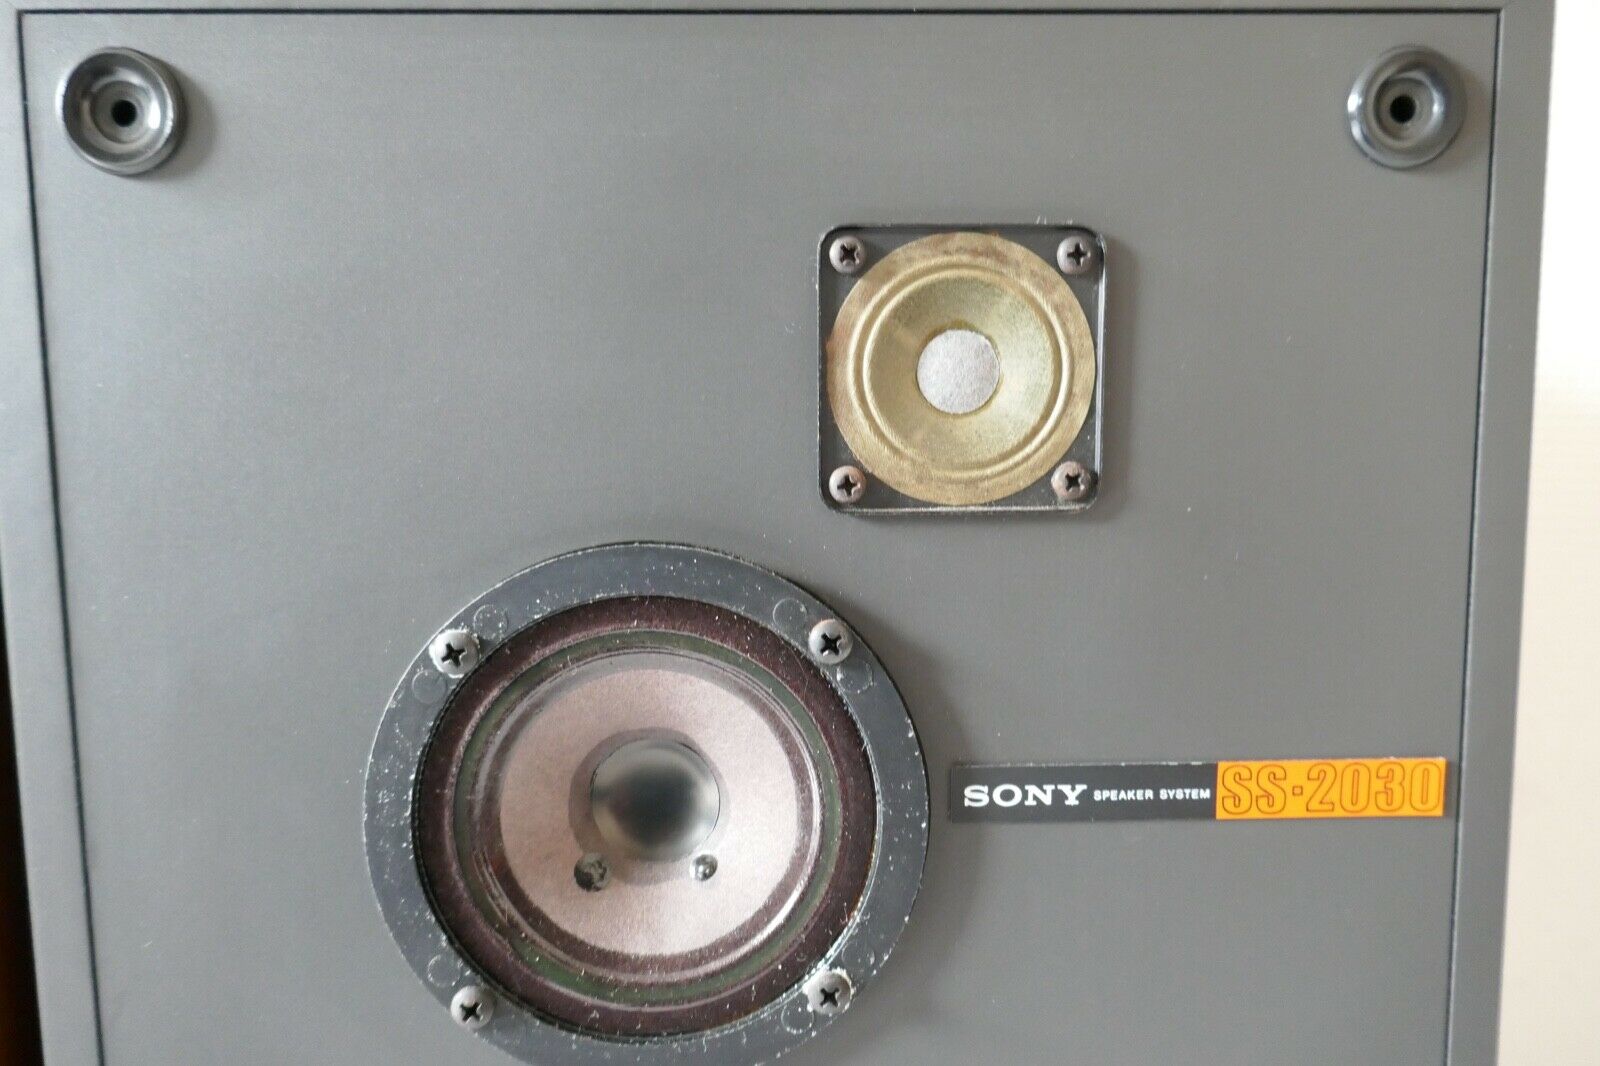 enceintes speakers sony ss-2030 vintage occasion